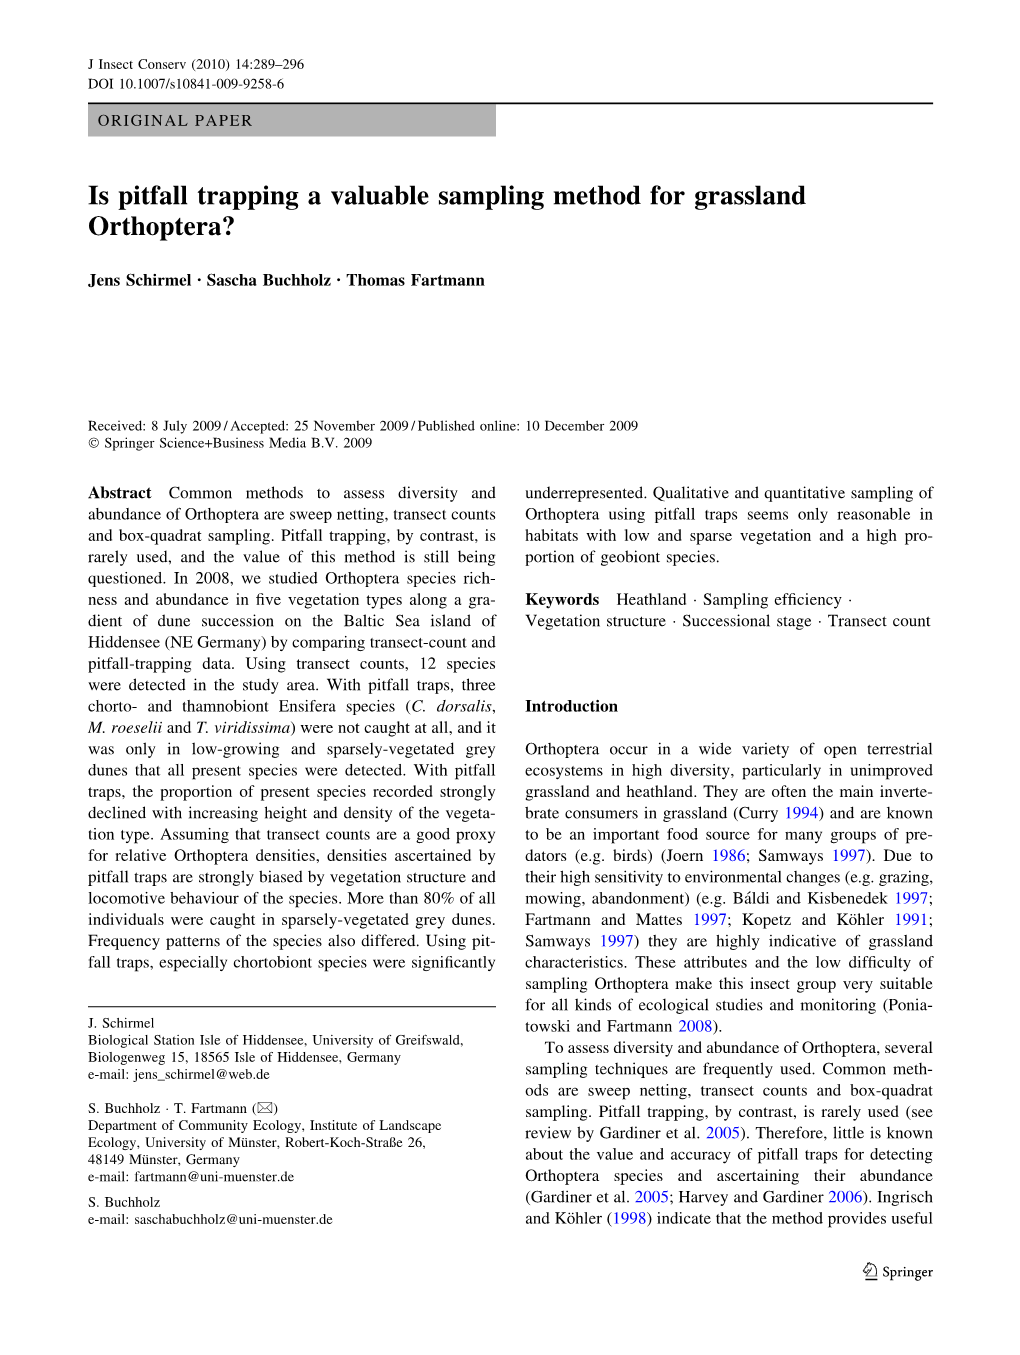 Is Pitfall Trapping a Valuable Sampling Method for Grassland Orthoptera?